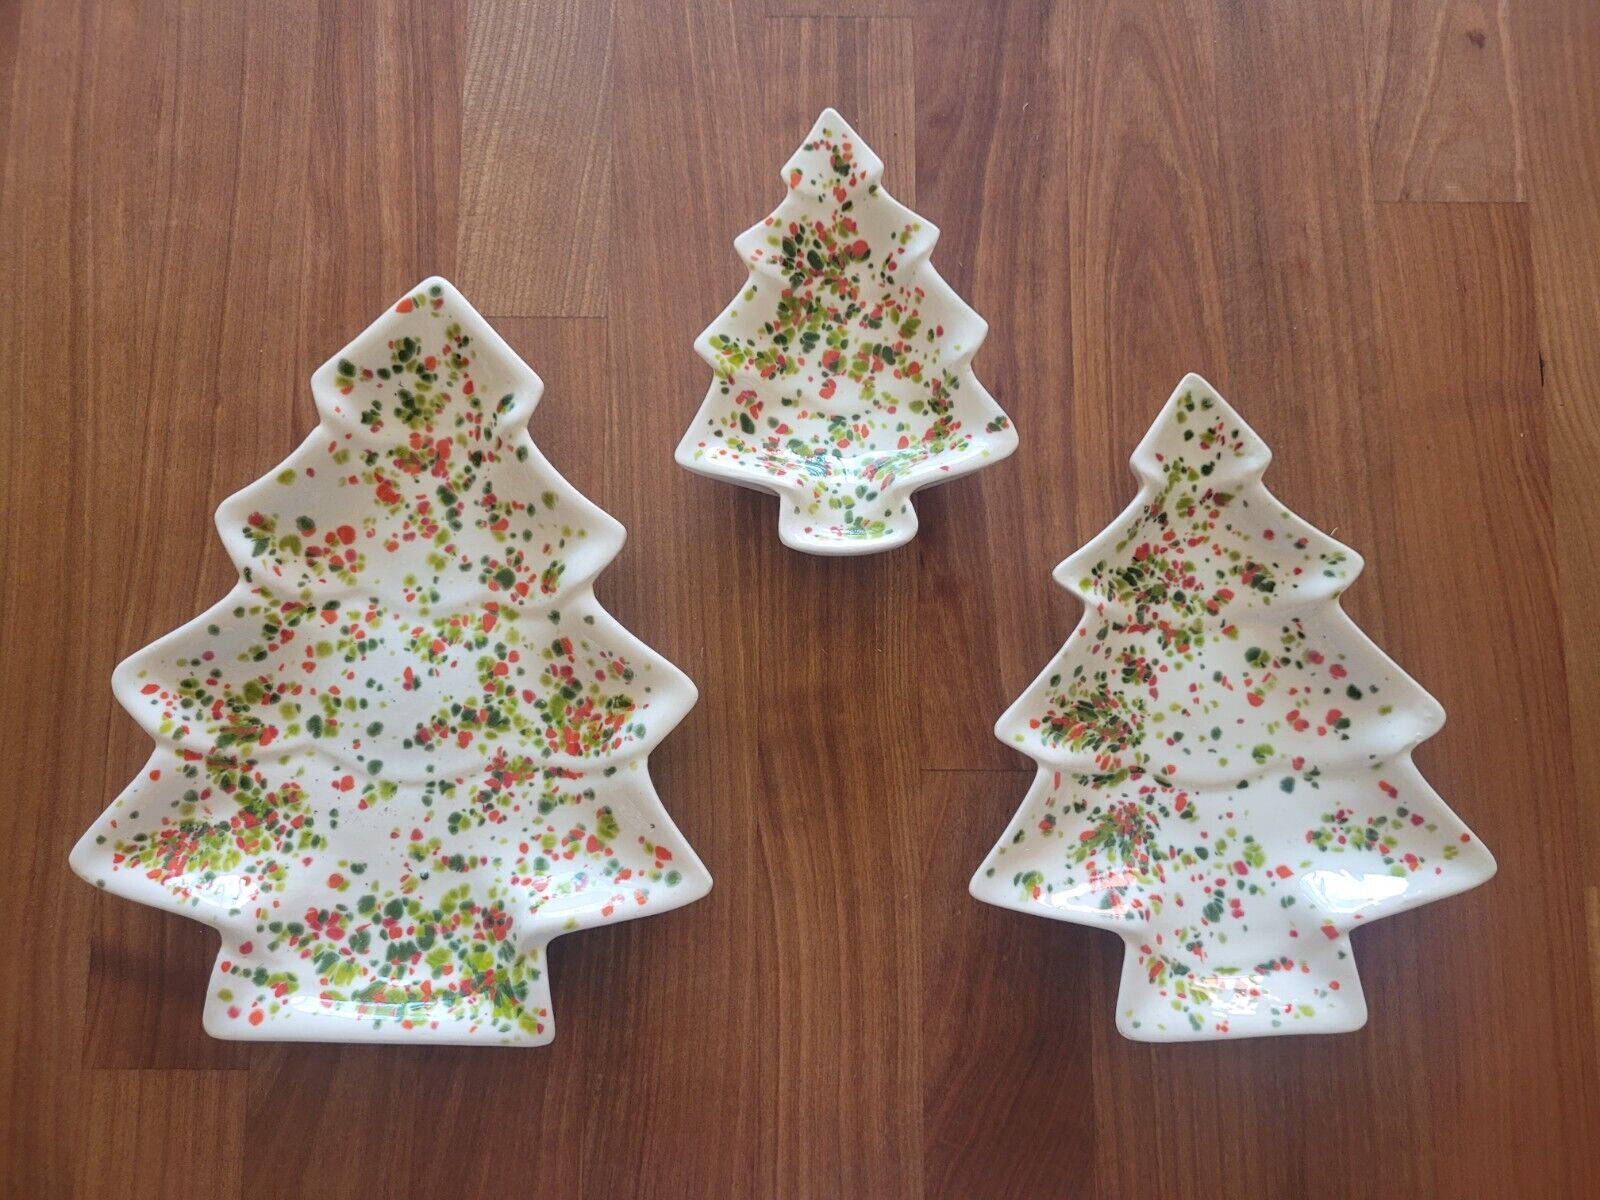 Vintage Speckled Ceramic Nesting Christmas Tree Candy Dishes Set Of 3 Speckled